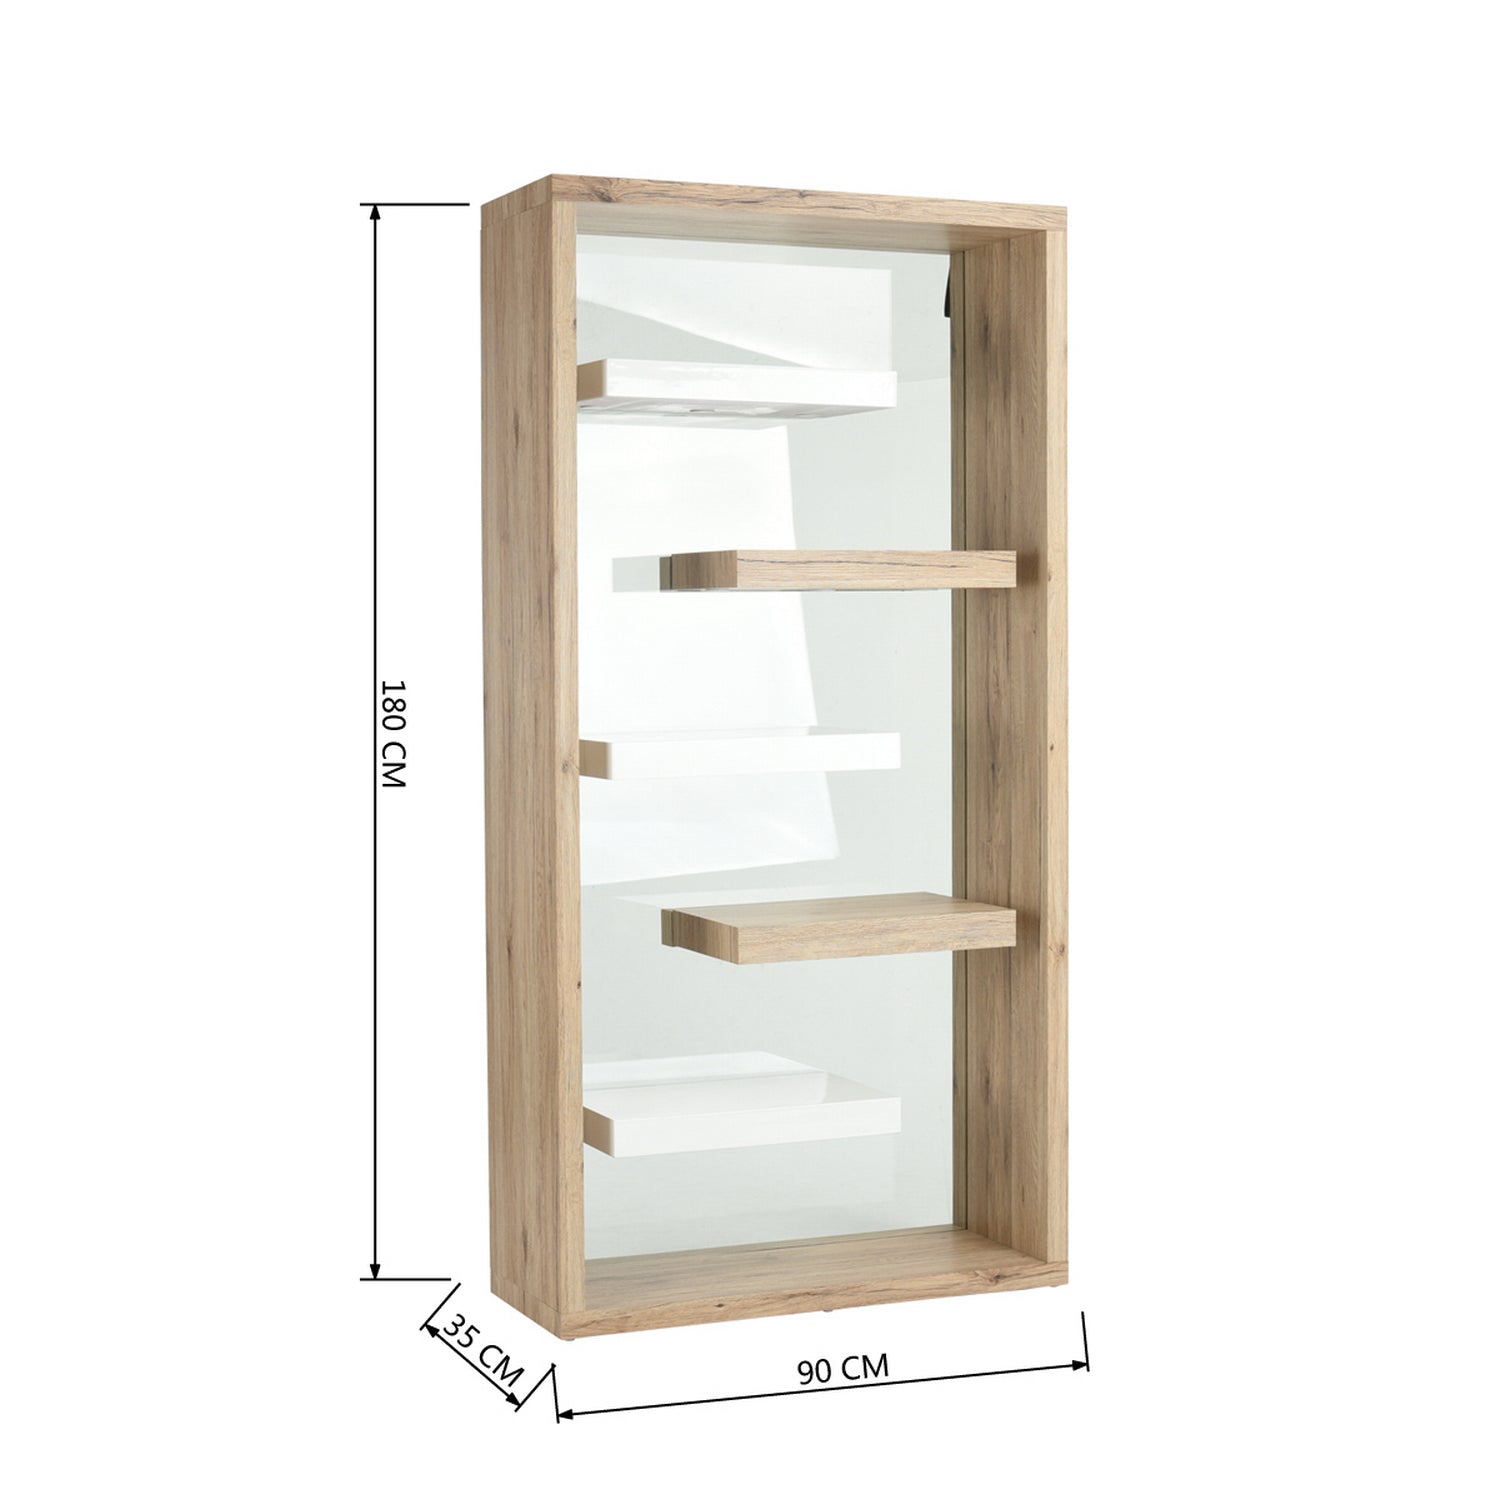 Large kitchen cabinet, modern wood and glass storage shelves - FLOAT WOOD YKC